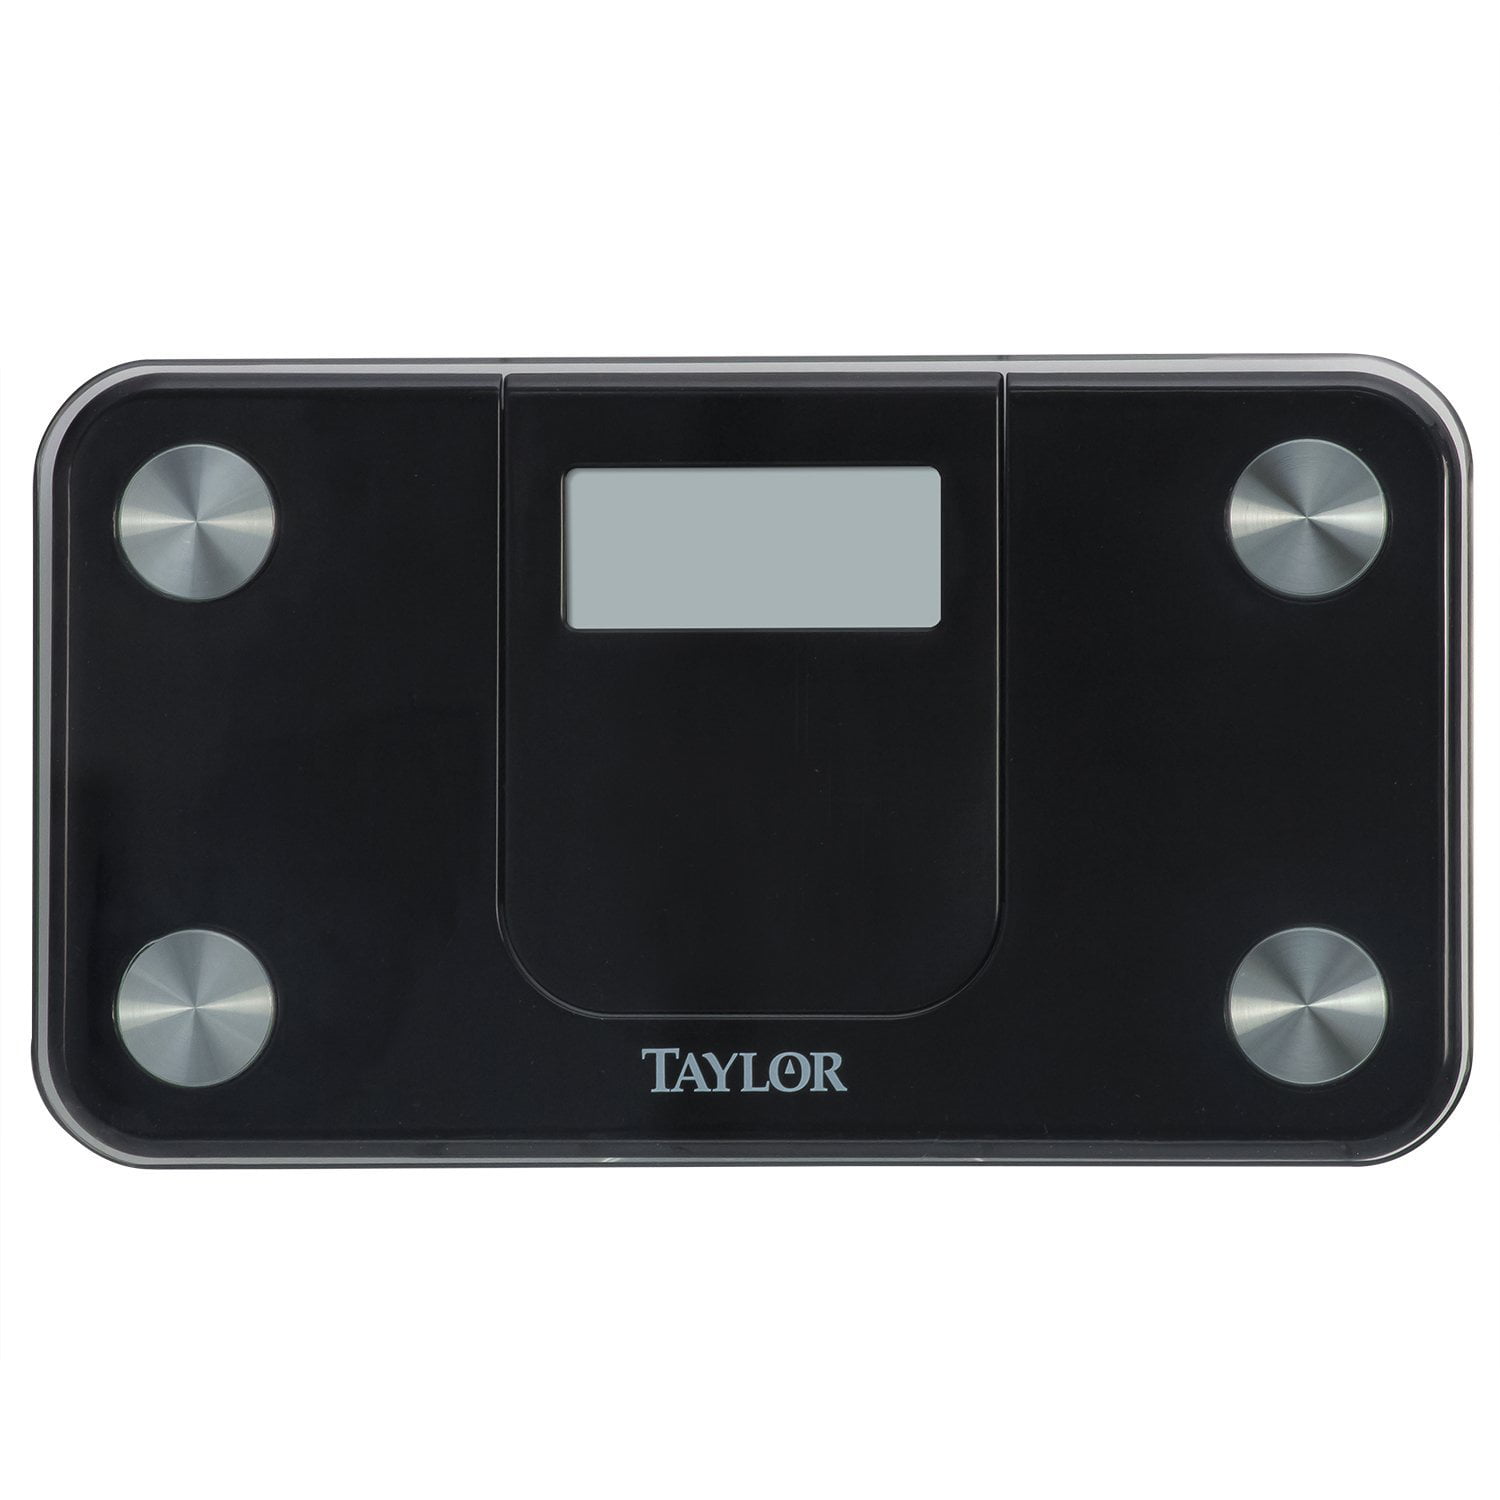 Taylor 7006 Lithium Electronic Digital Scale with 1-Inch LCD Display